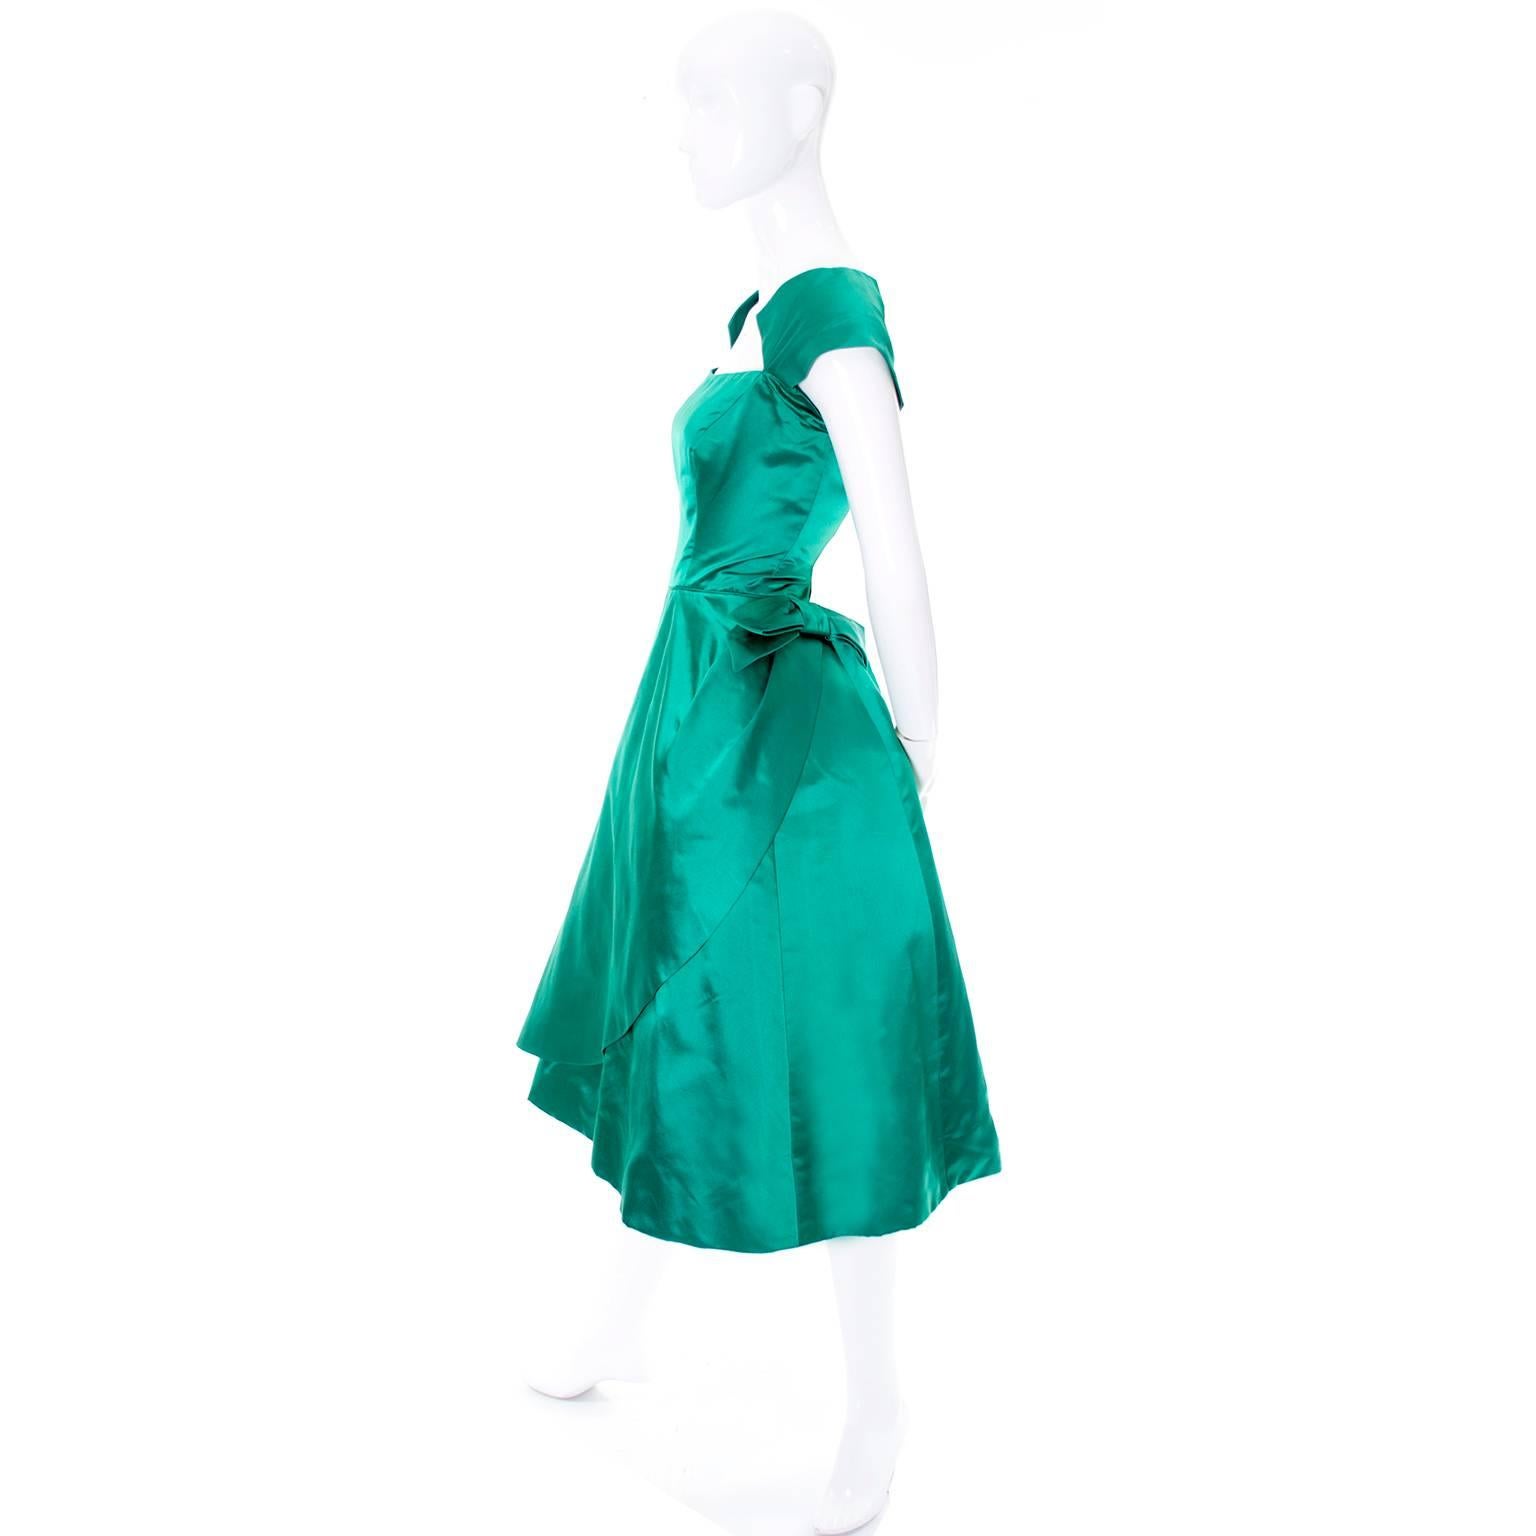 This oh so pretty green satin vintage dress was designed by Philip Hulitar in the 1950's.  This dress was purchased at Bramson's Department store in Chicago in the 50's for a special occasion.  The dress has a built in slip and a back zipper (which